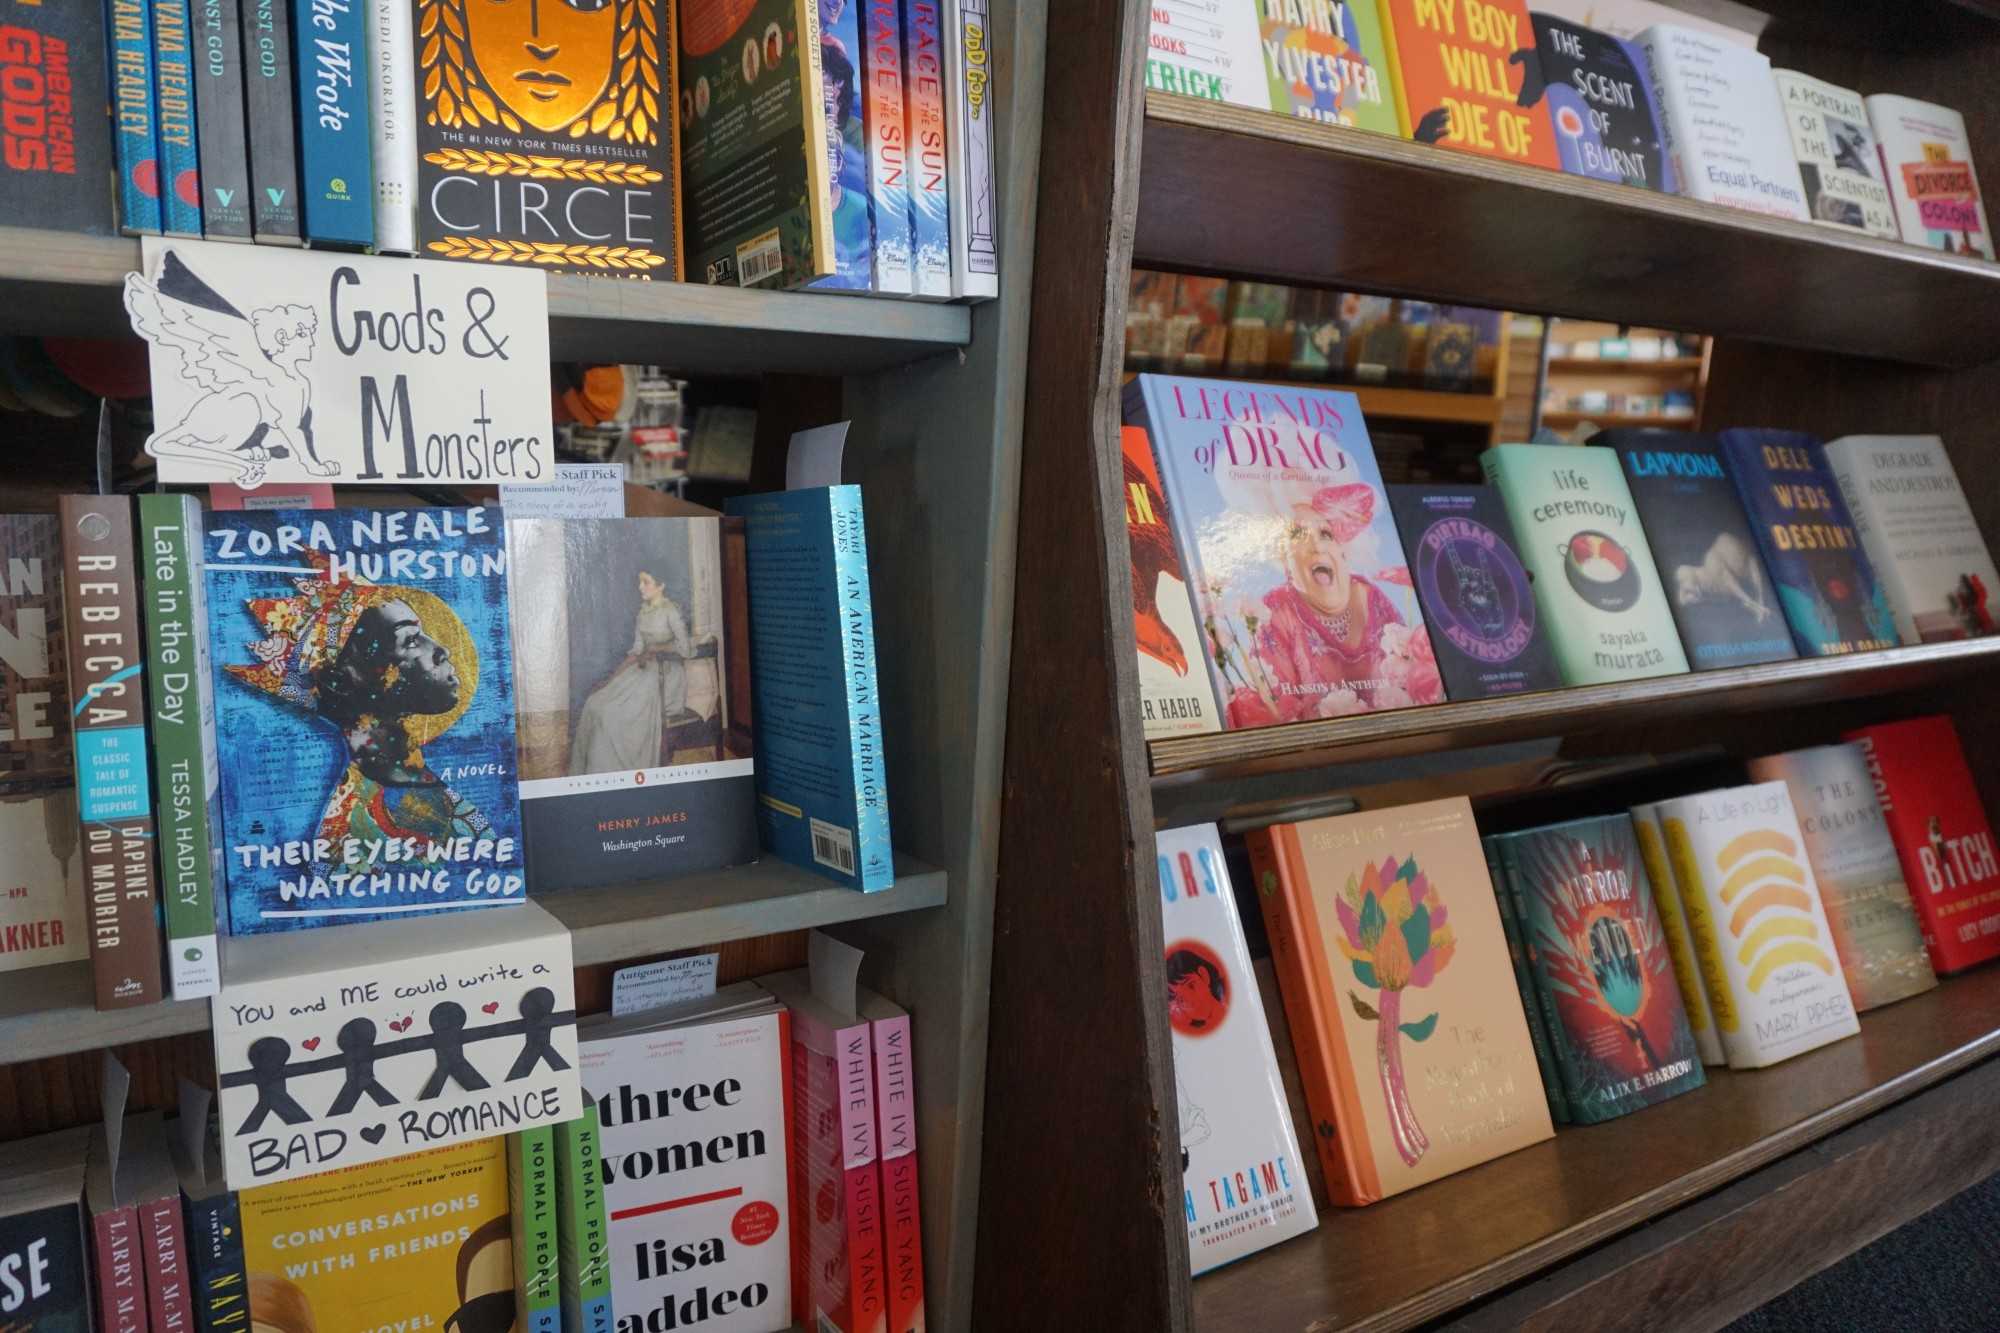 Antigone Books, a women-owned, solar-powered independent bookstore, features book recommendations by category.